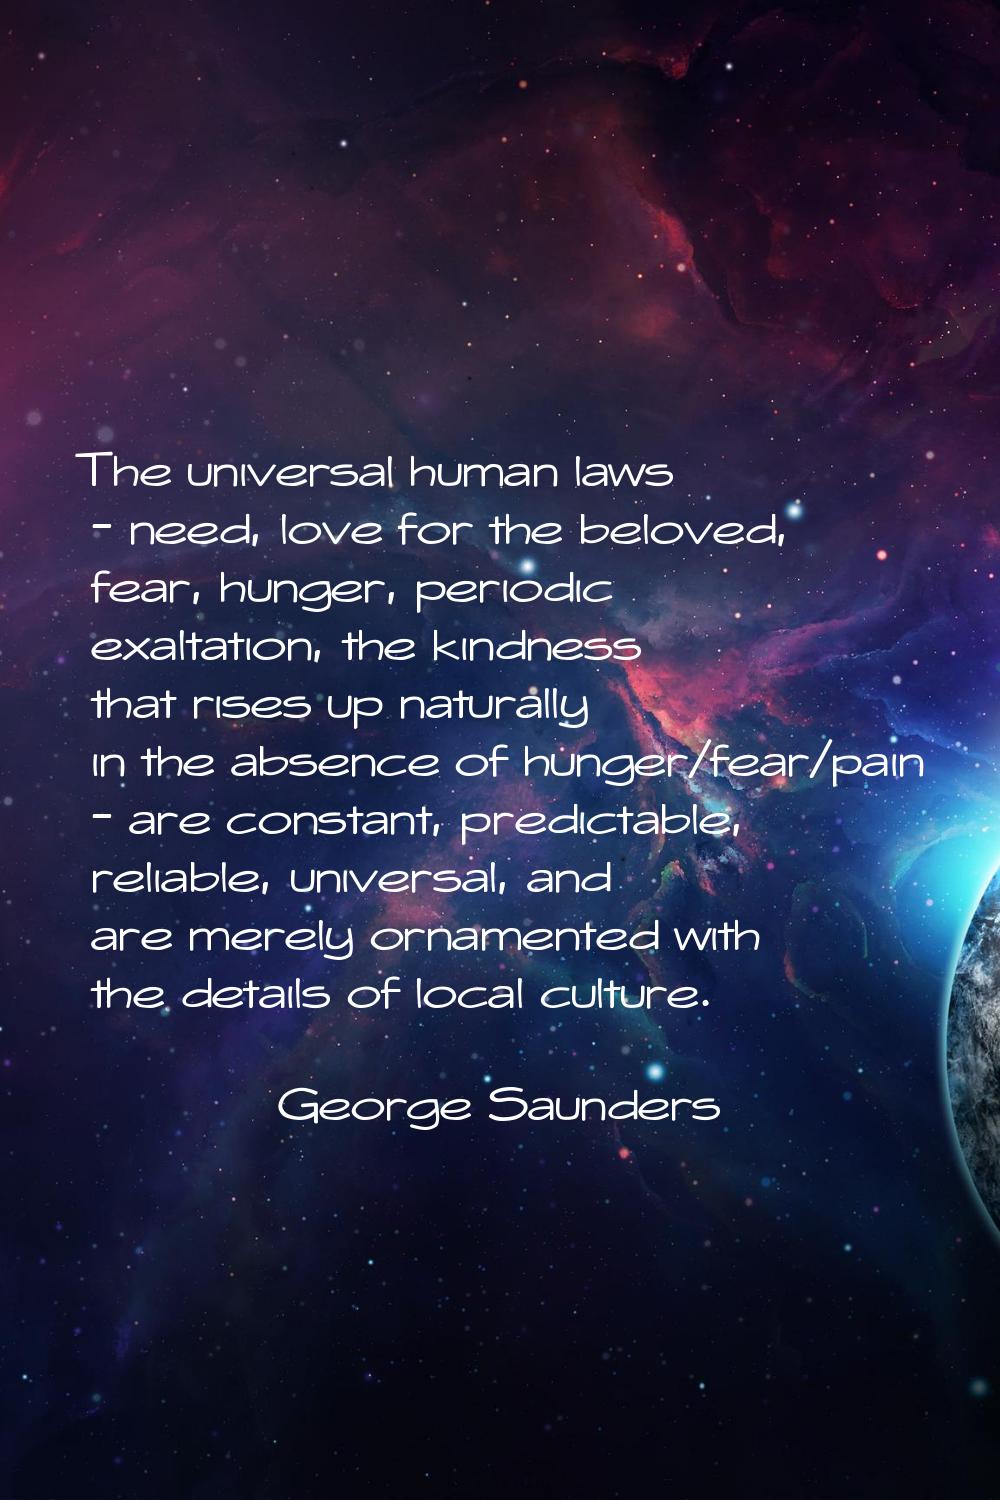 The universal human laws - need, love for the beloved, fear, hunger, periodic exaltation, the kindn